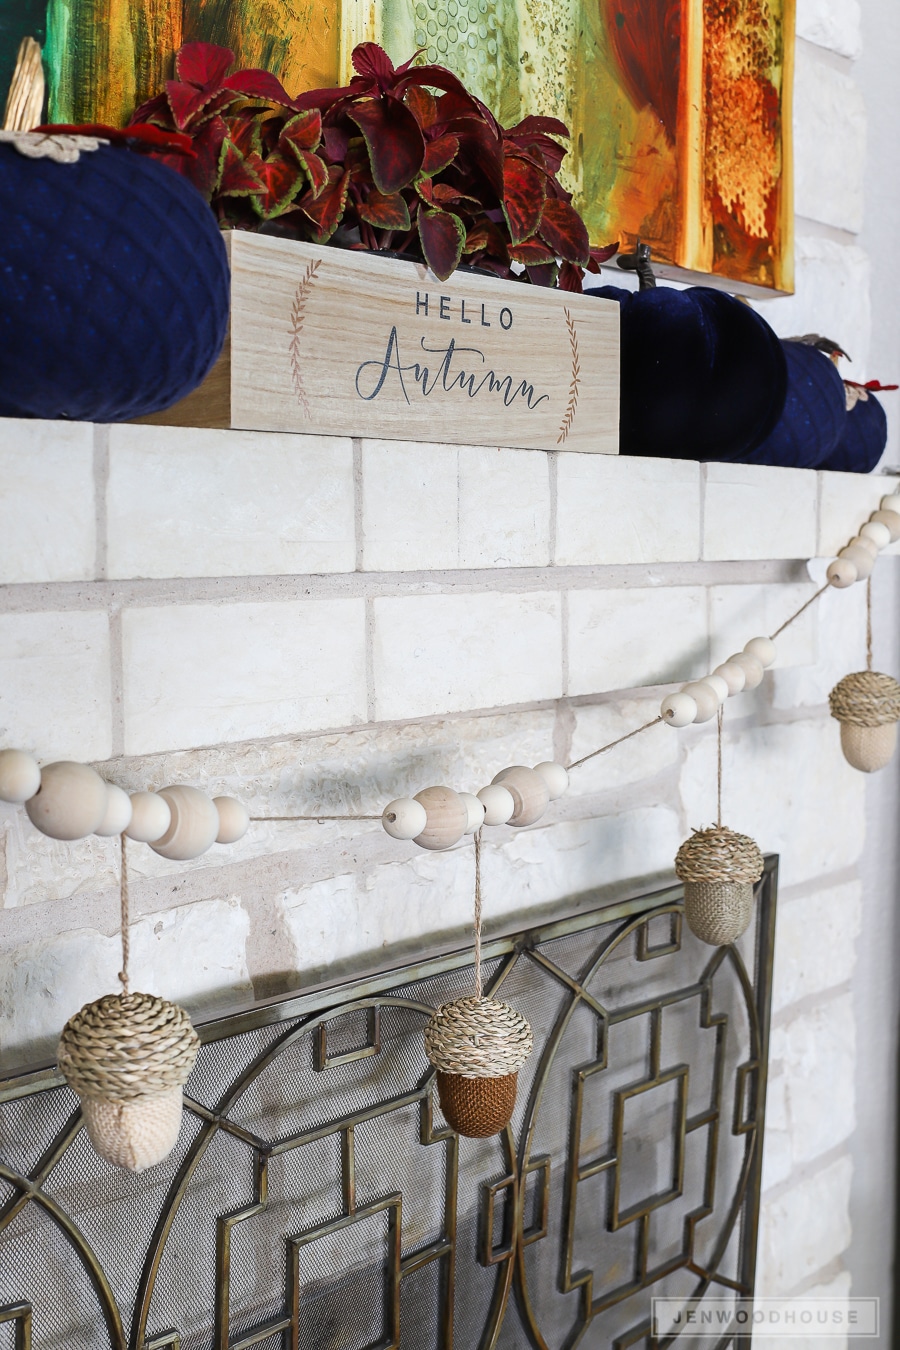 How to make a DIY acorn garland - perfect for Fall decorating!